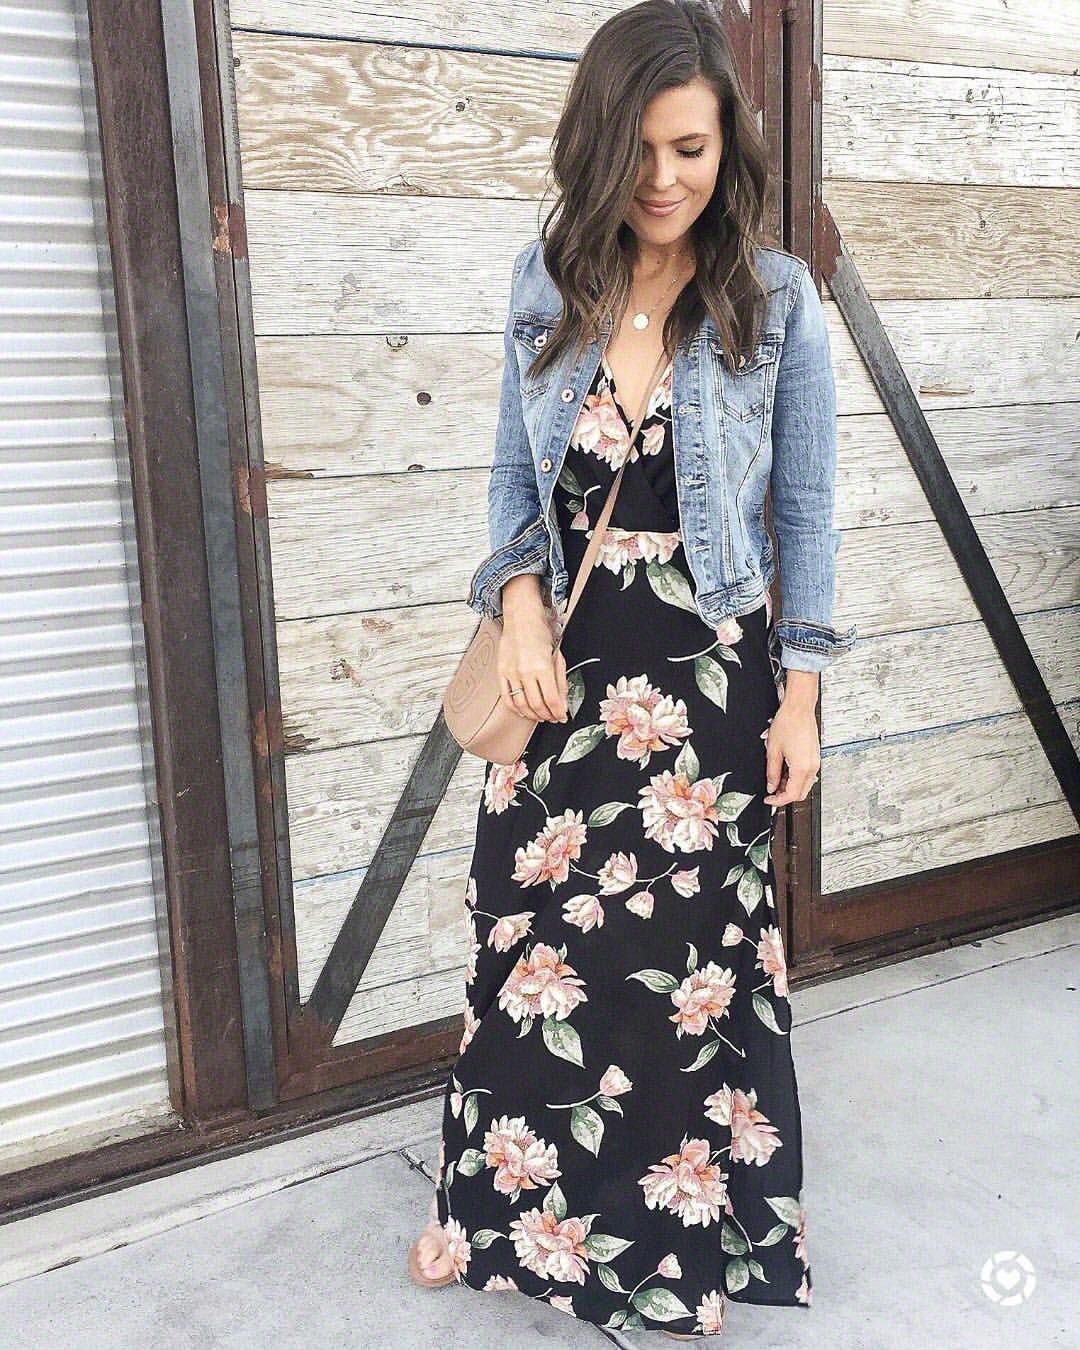 Brie Bemis Rearick on Instagram: “How gorgeous is this dress for spring?! I love me some pretty floral prints. 🌸 This one comes in 3 prints and 2 colors. I’m also loving the…”